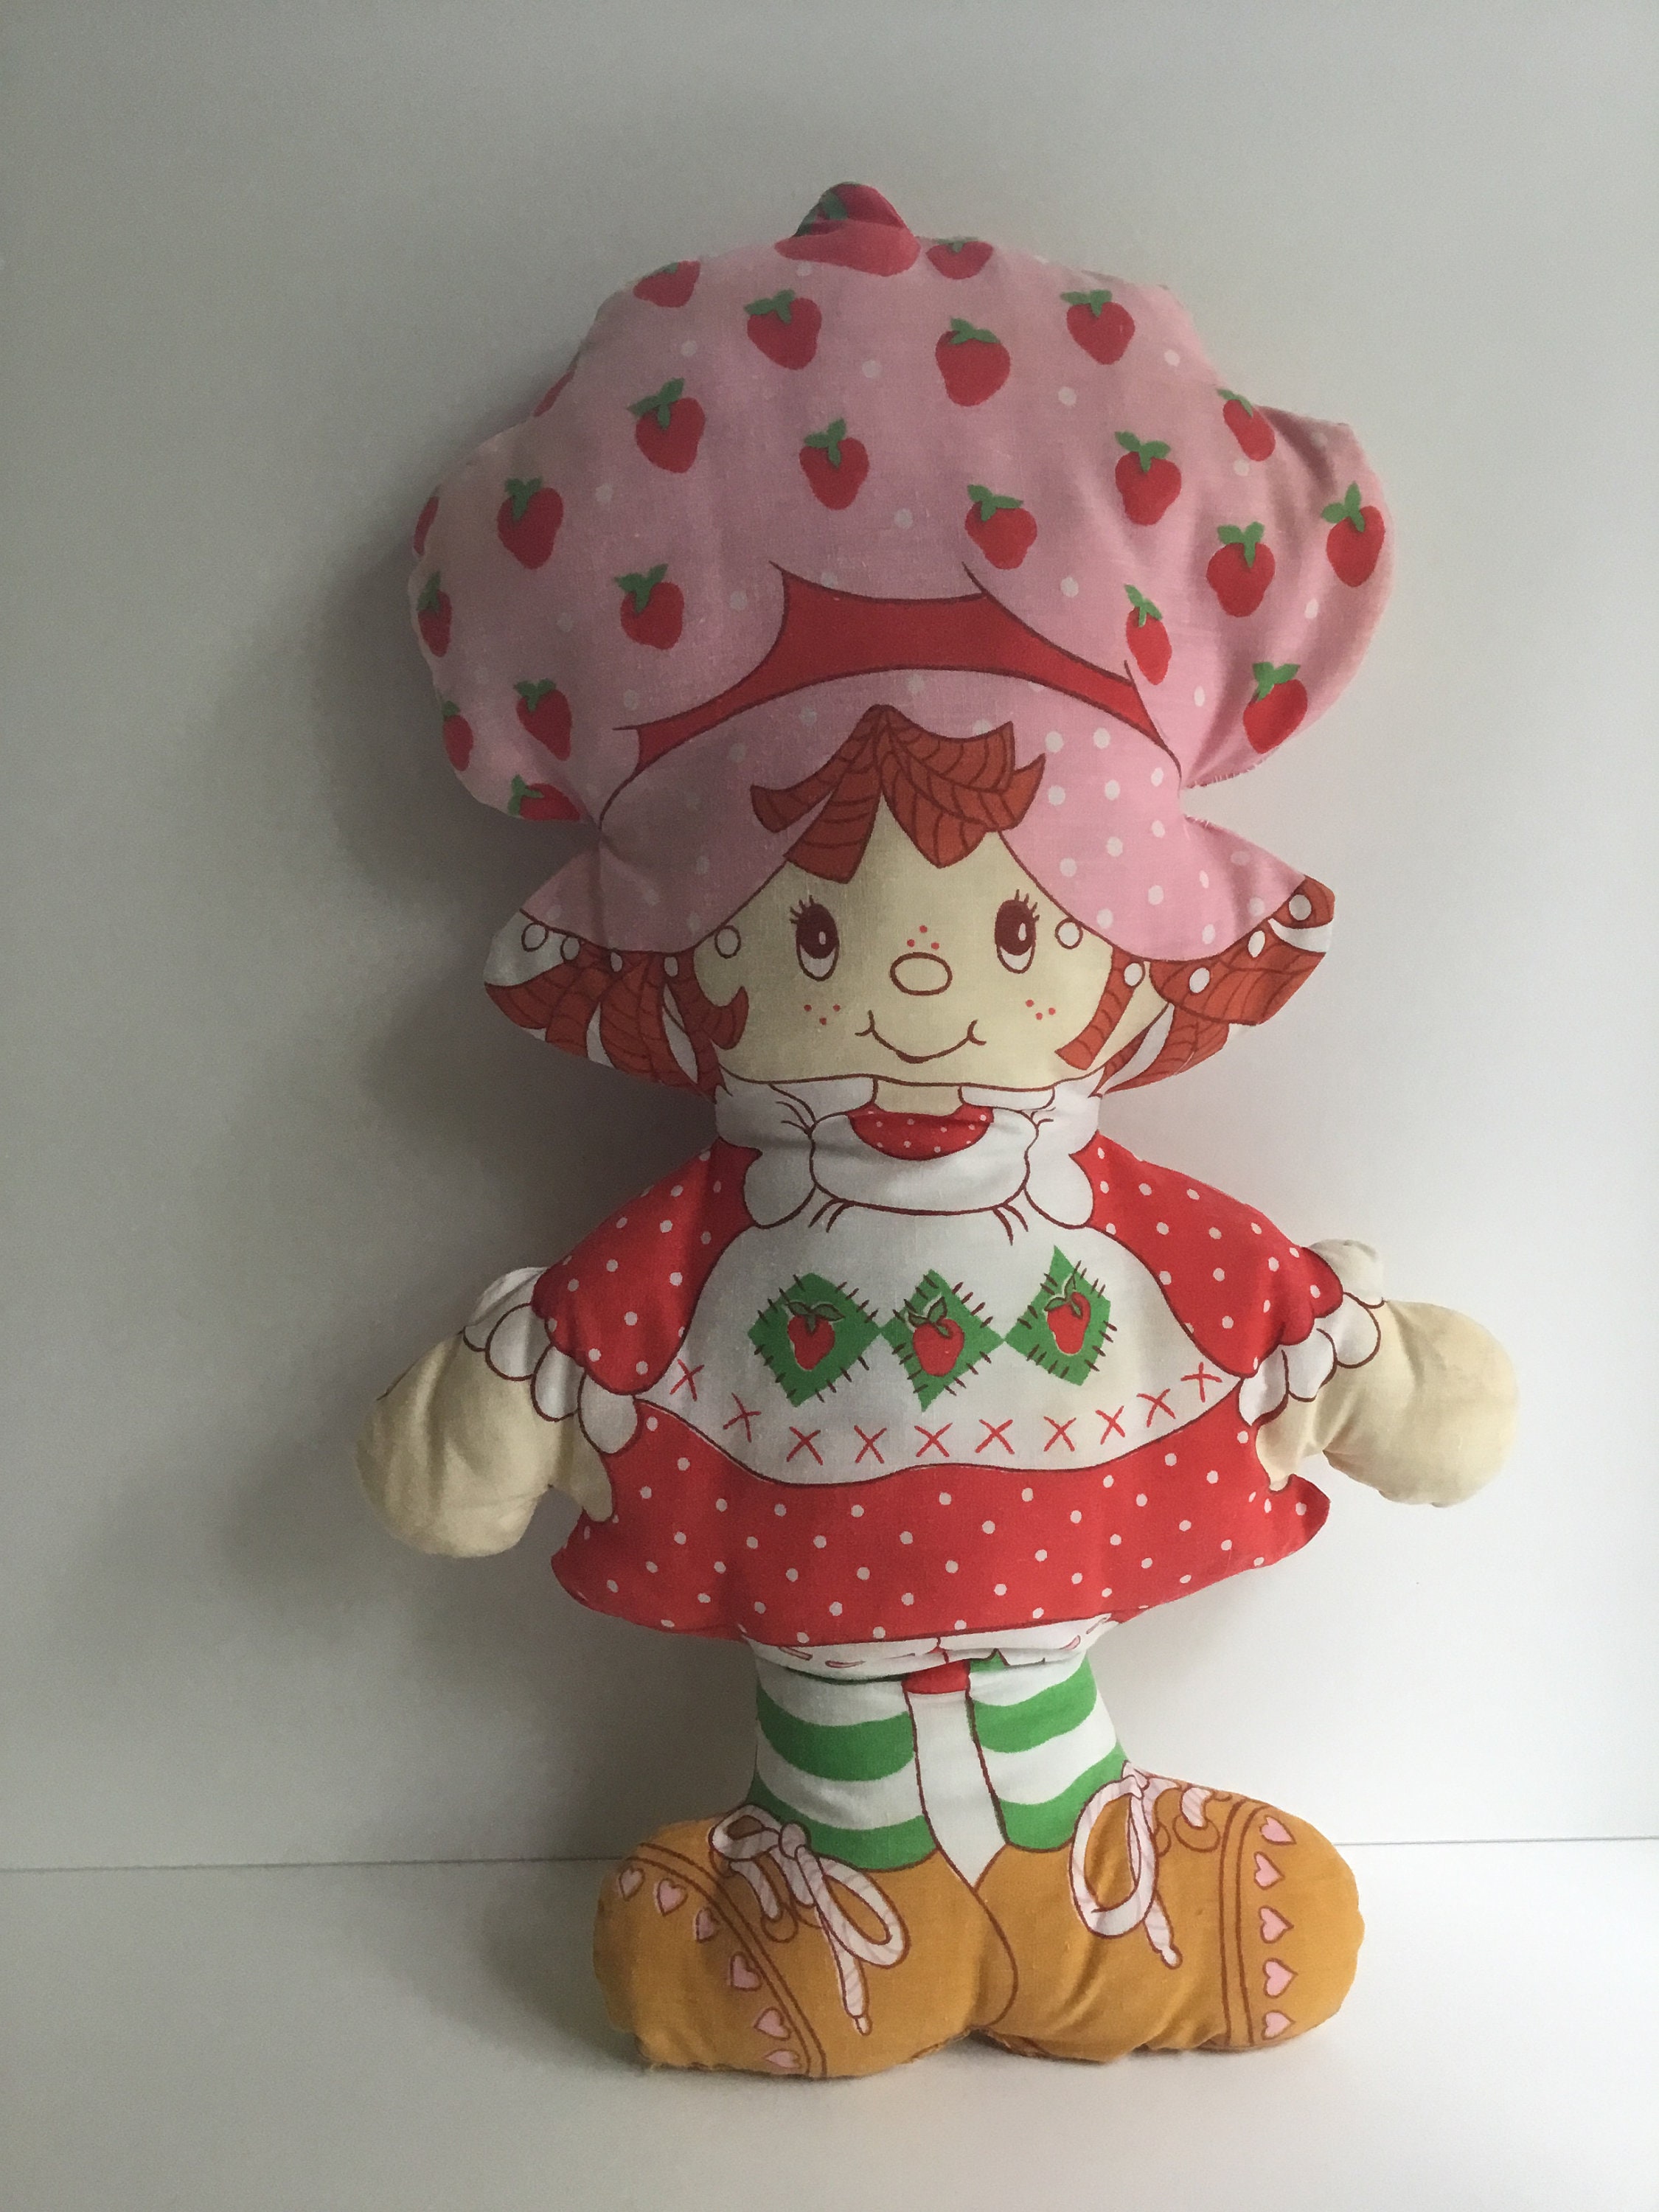 Buy Strawberry Shortcake Pillow Doll Online In India - Etsy India